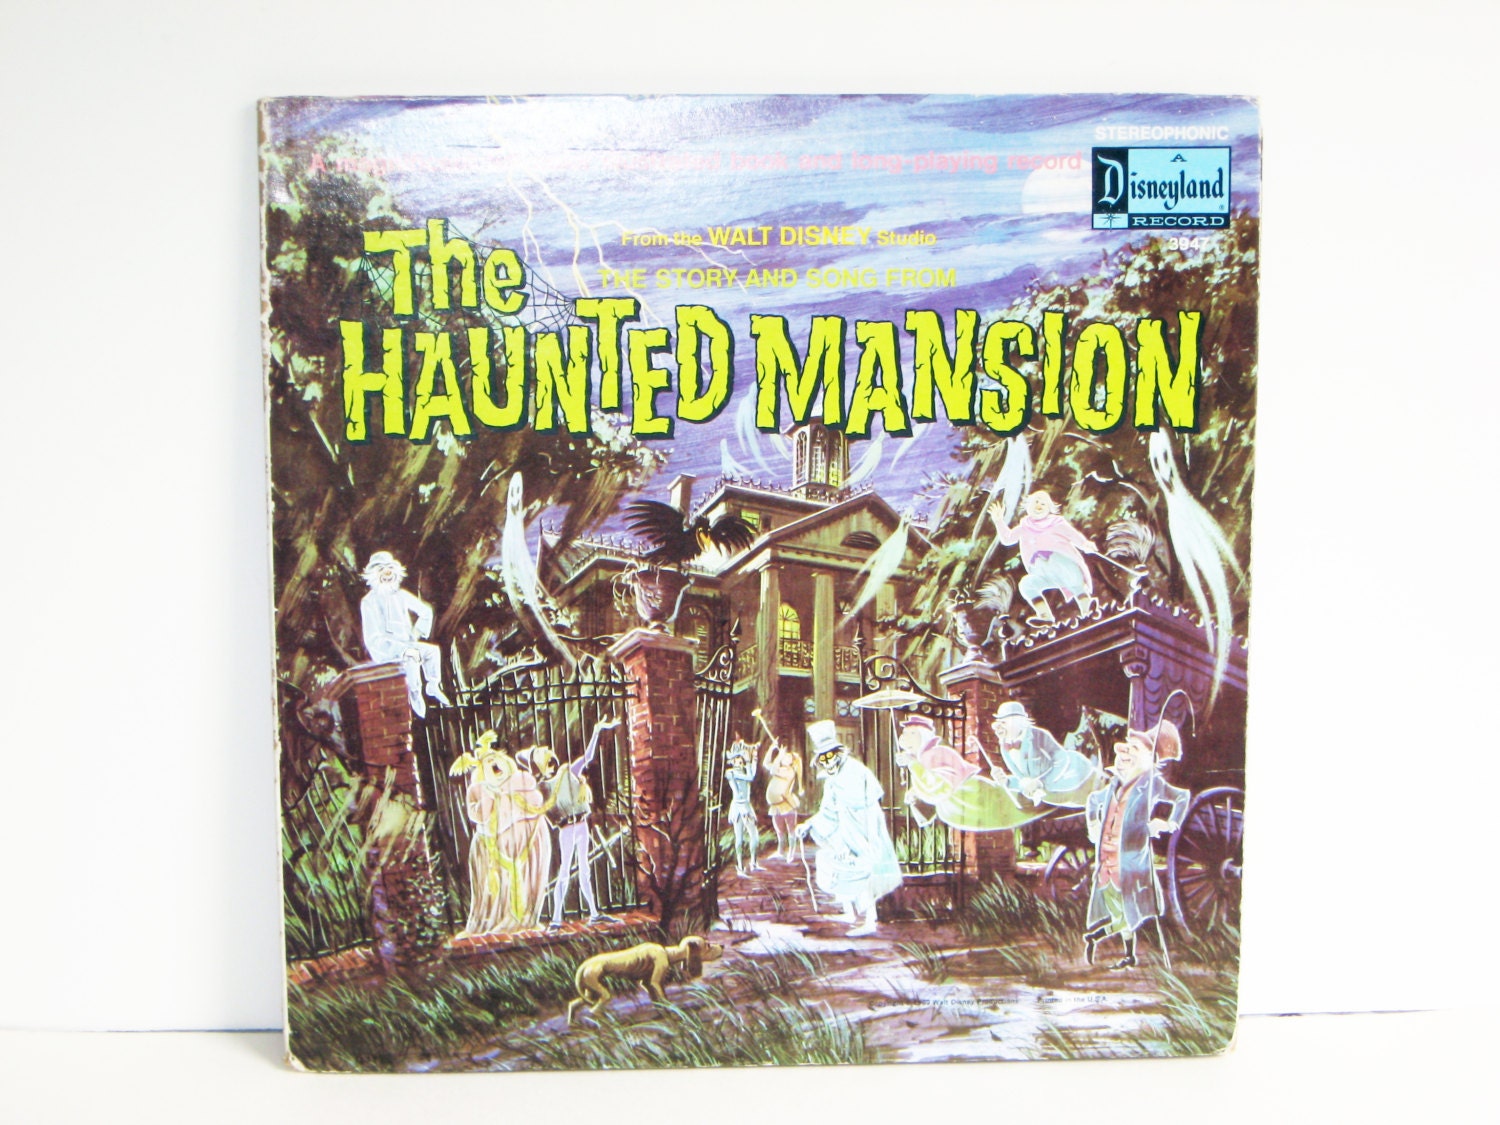 Disney's The Haunted Mansion LP Record with 11 page